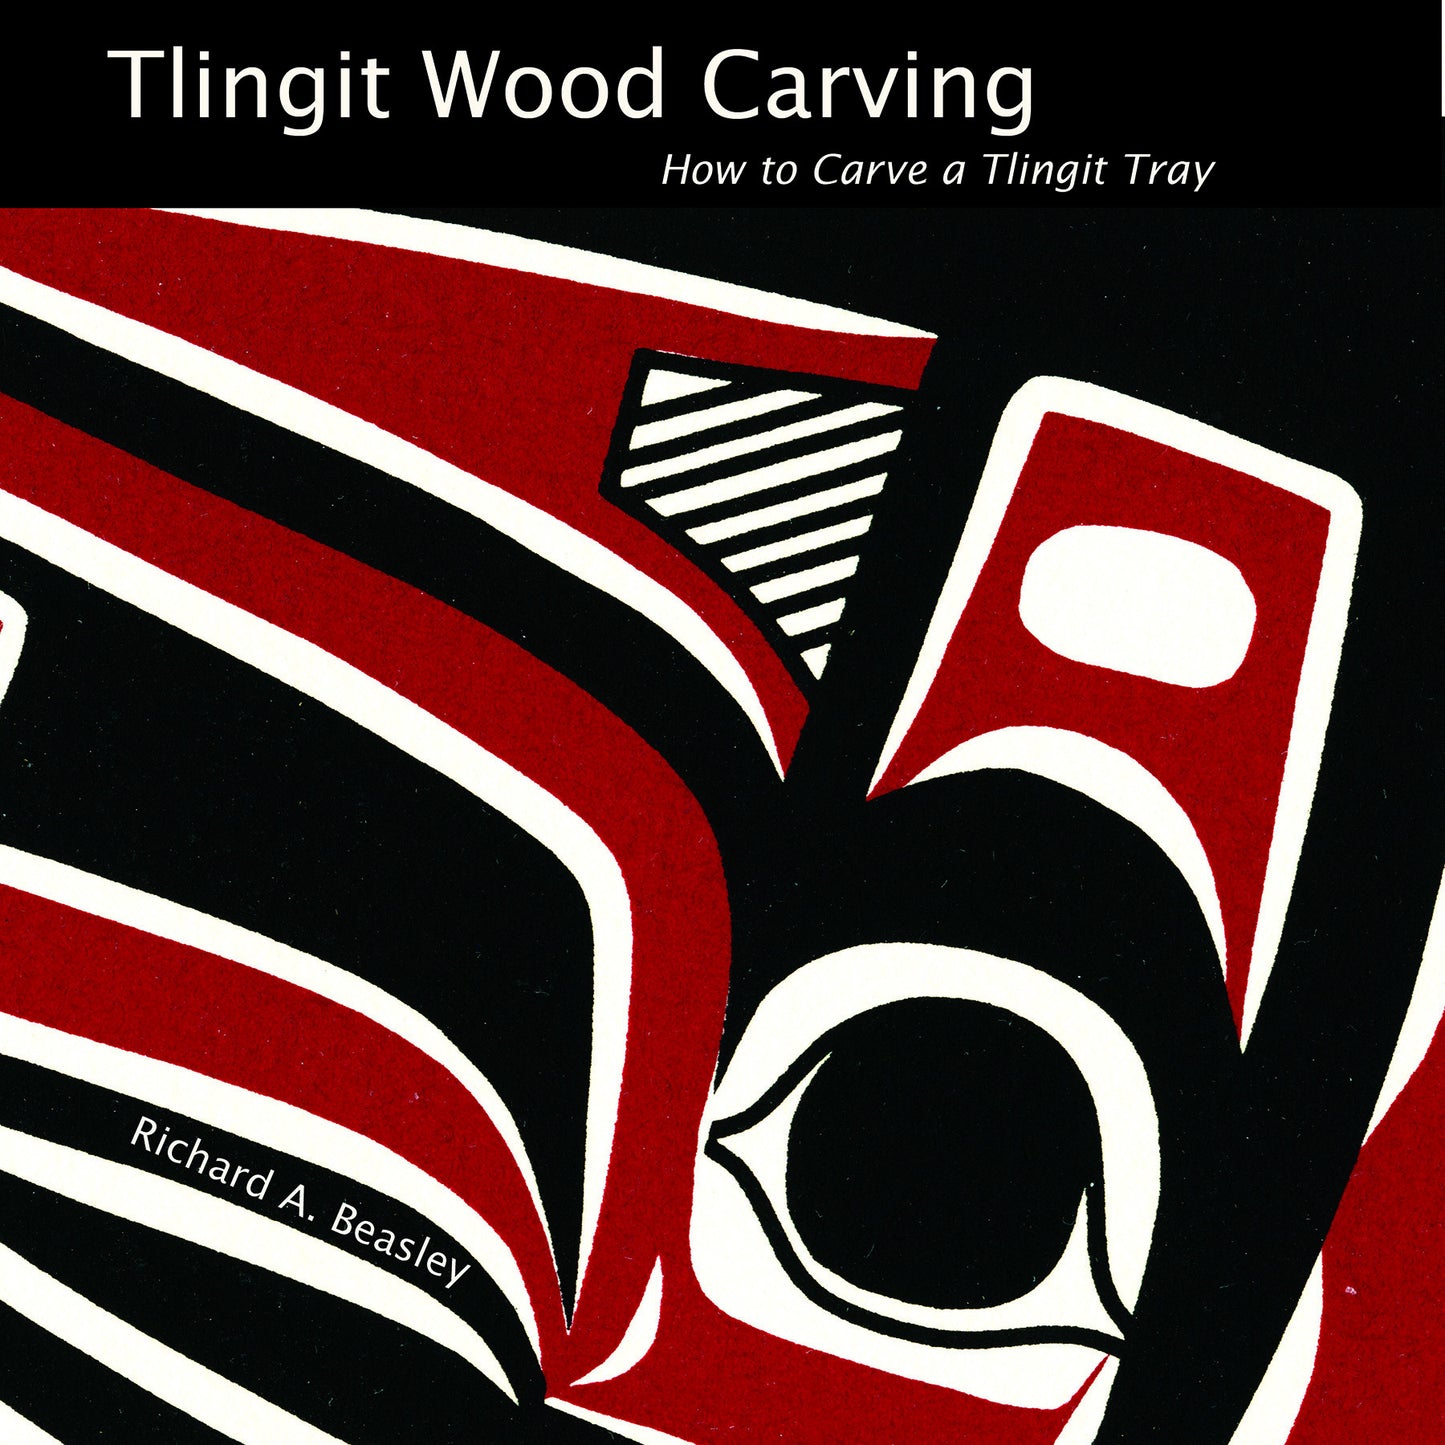 Book -  "Tlingit Wood Carving: How to Carve a Tlingit Tray", R. Beasley